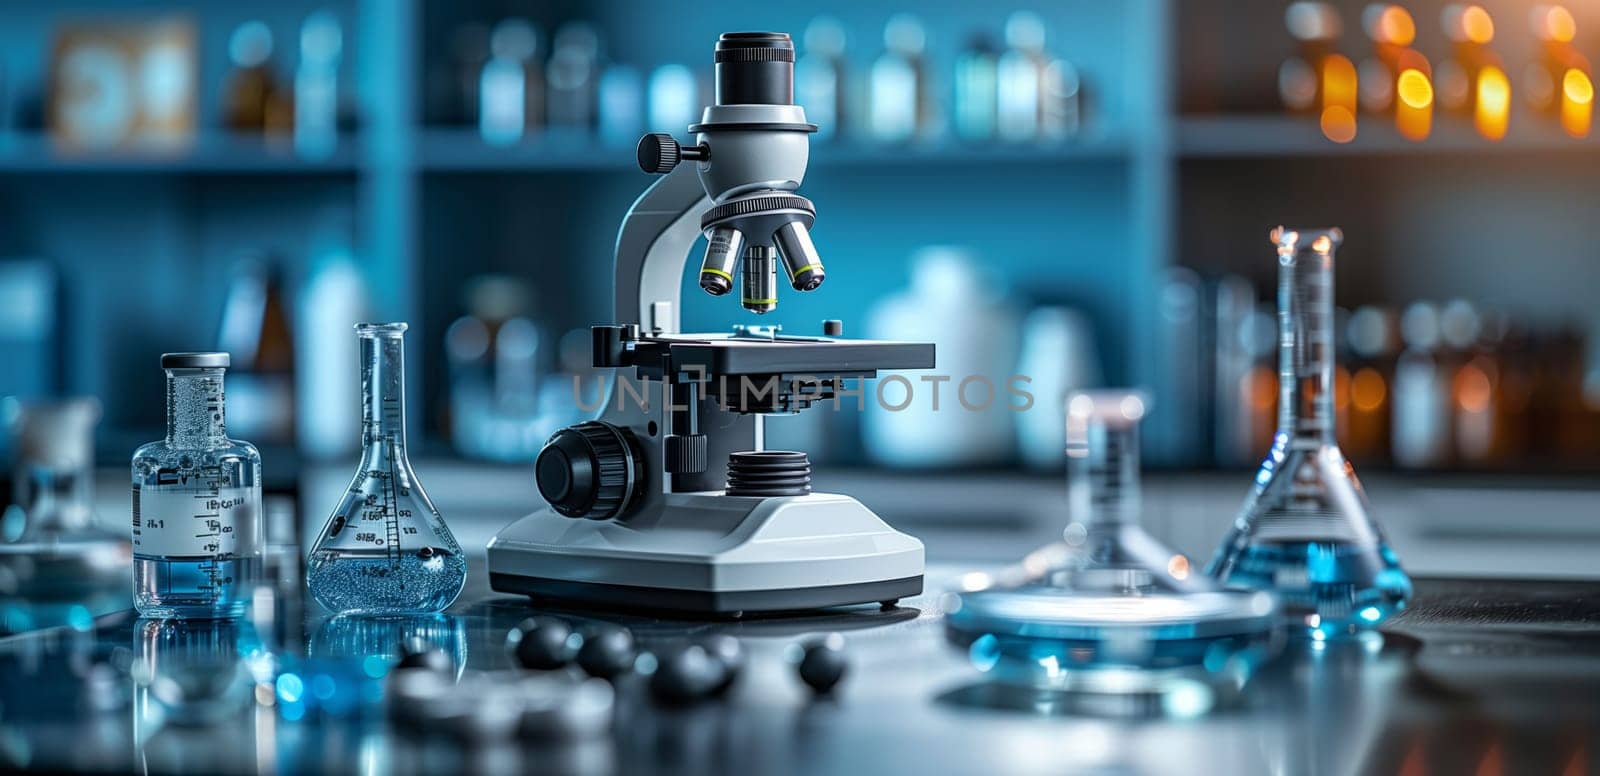 a microscope is sitting on a table in a laboratory surrounded by beakers and flasks by richwolf